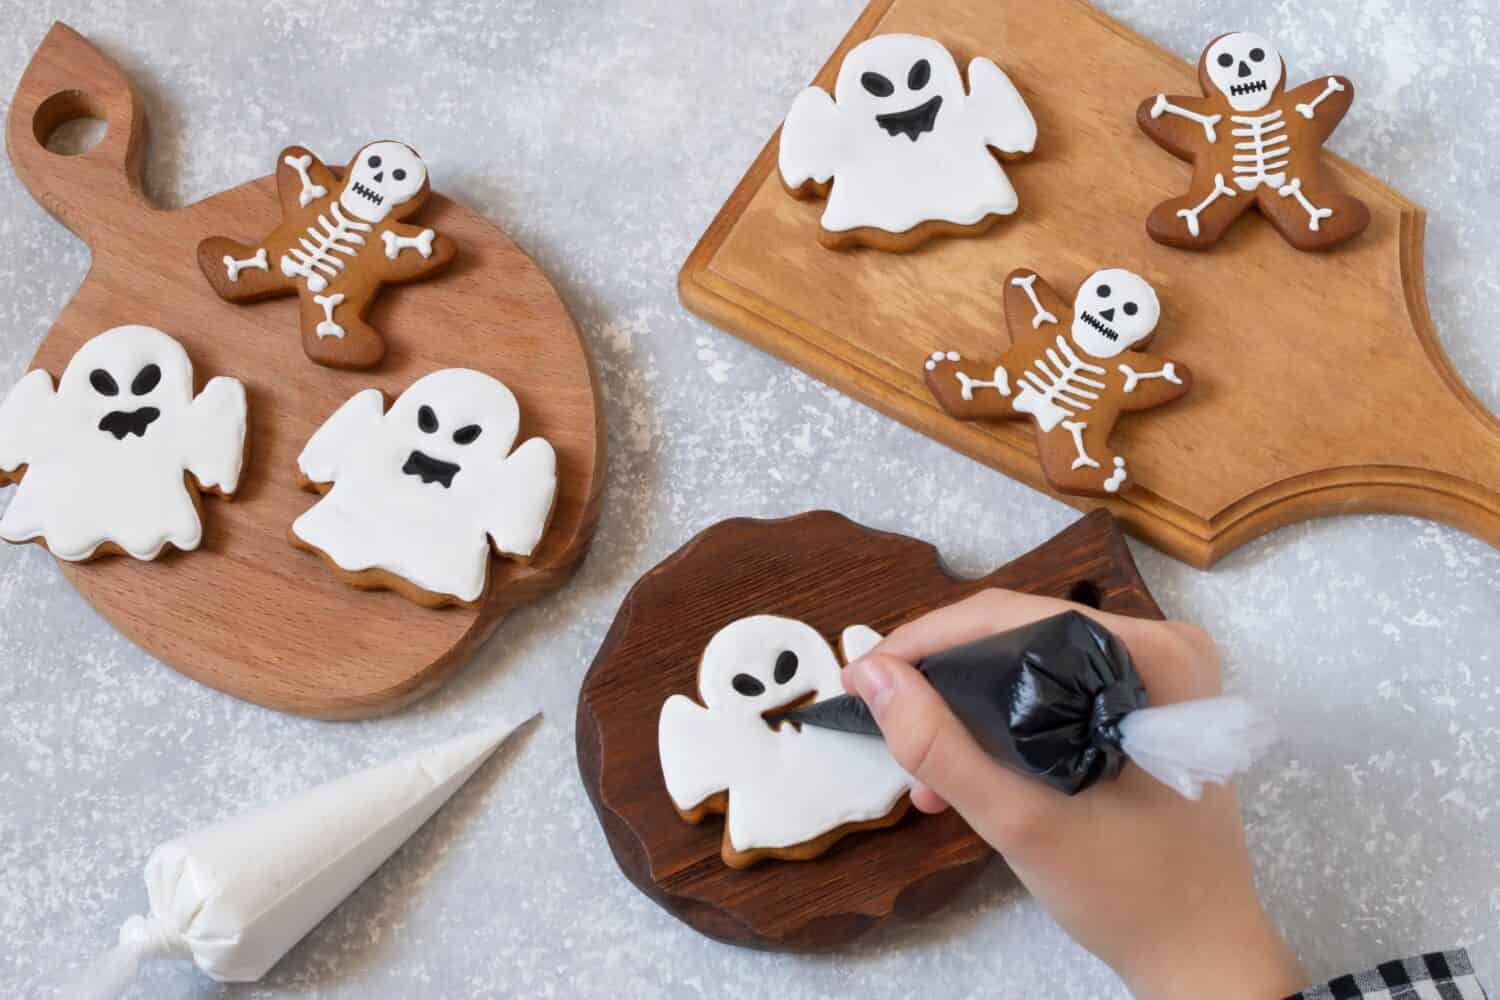 Decorating Halloween gingerbreads of ghosts and skeletons with frosting. Girl holds pastry bag with black icing and decorates gingerbread ghost